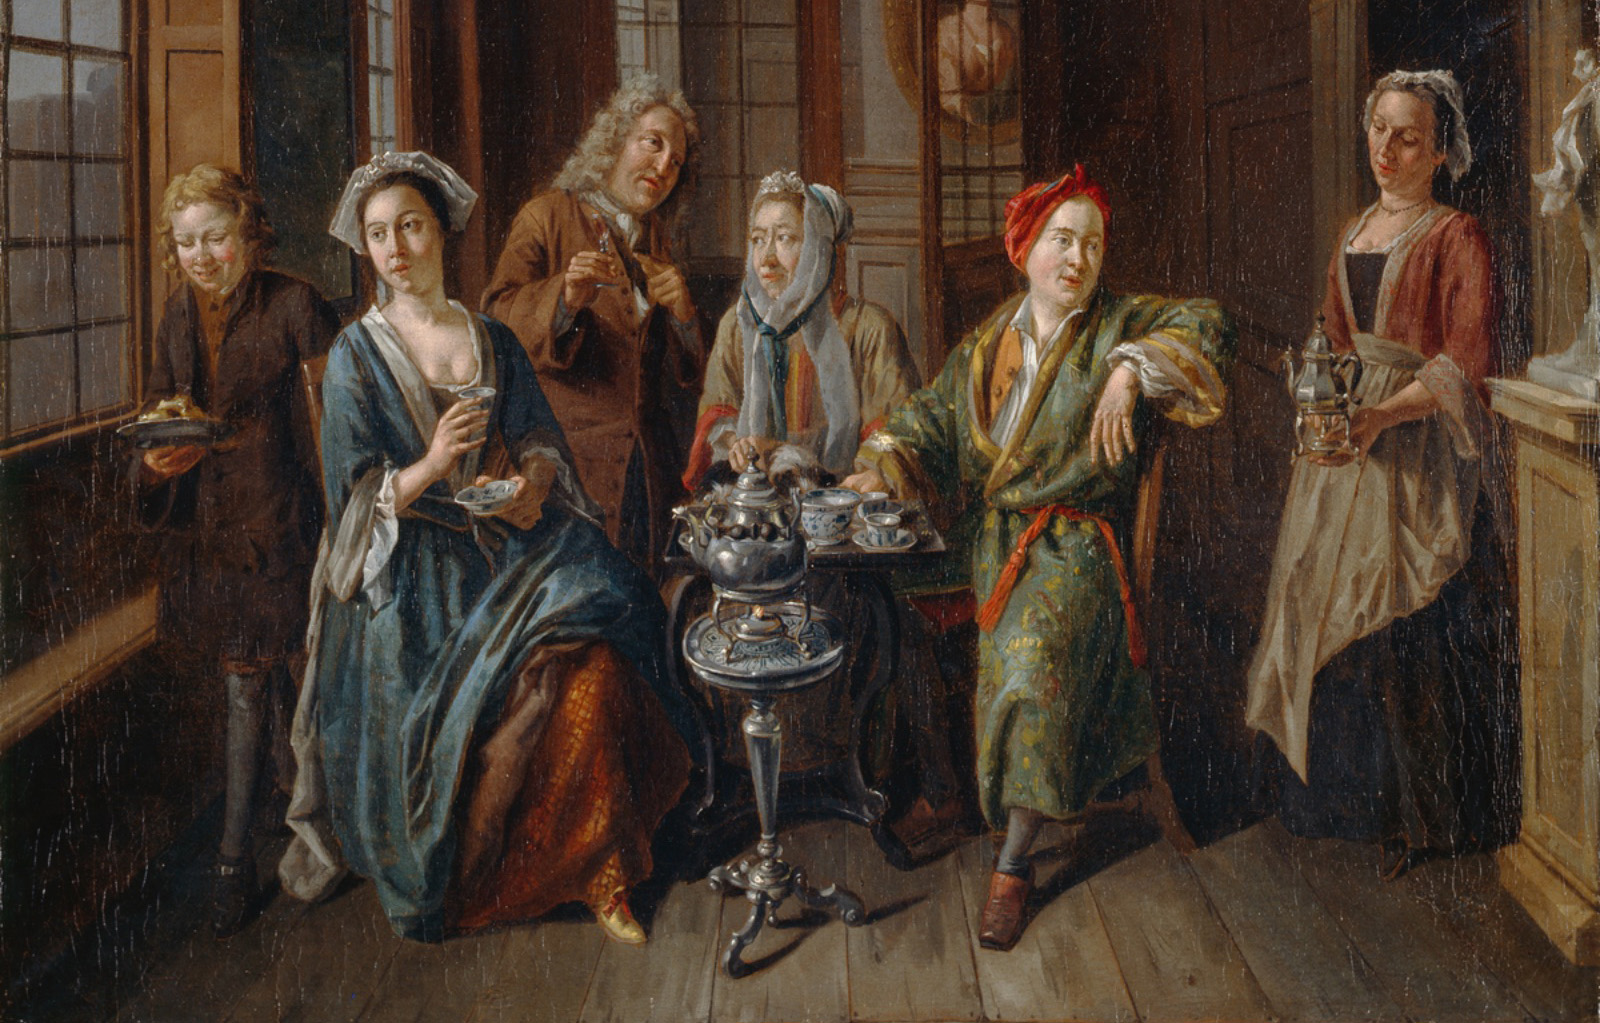 Josef Van Aken, A Tea Party - This is an early example of an English 'Conversation Piece', or informal group portrait, a genre whose evolution was largely informed by Van Aken's knowledge of Dutch and Flemish interior subjects. The figures are dressed in fashionable indoor clothes, the man in an informal gown with a loose cap, instead of a wig. There's a tea set in the middles and the subjects are all leaning in as if in mid conversation.